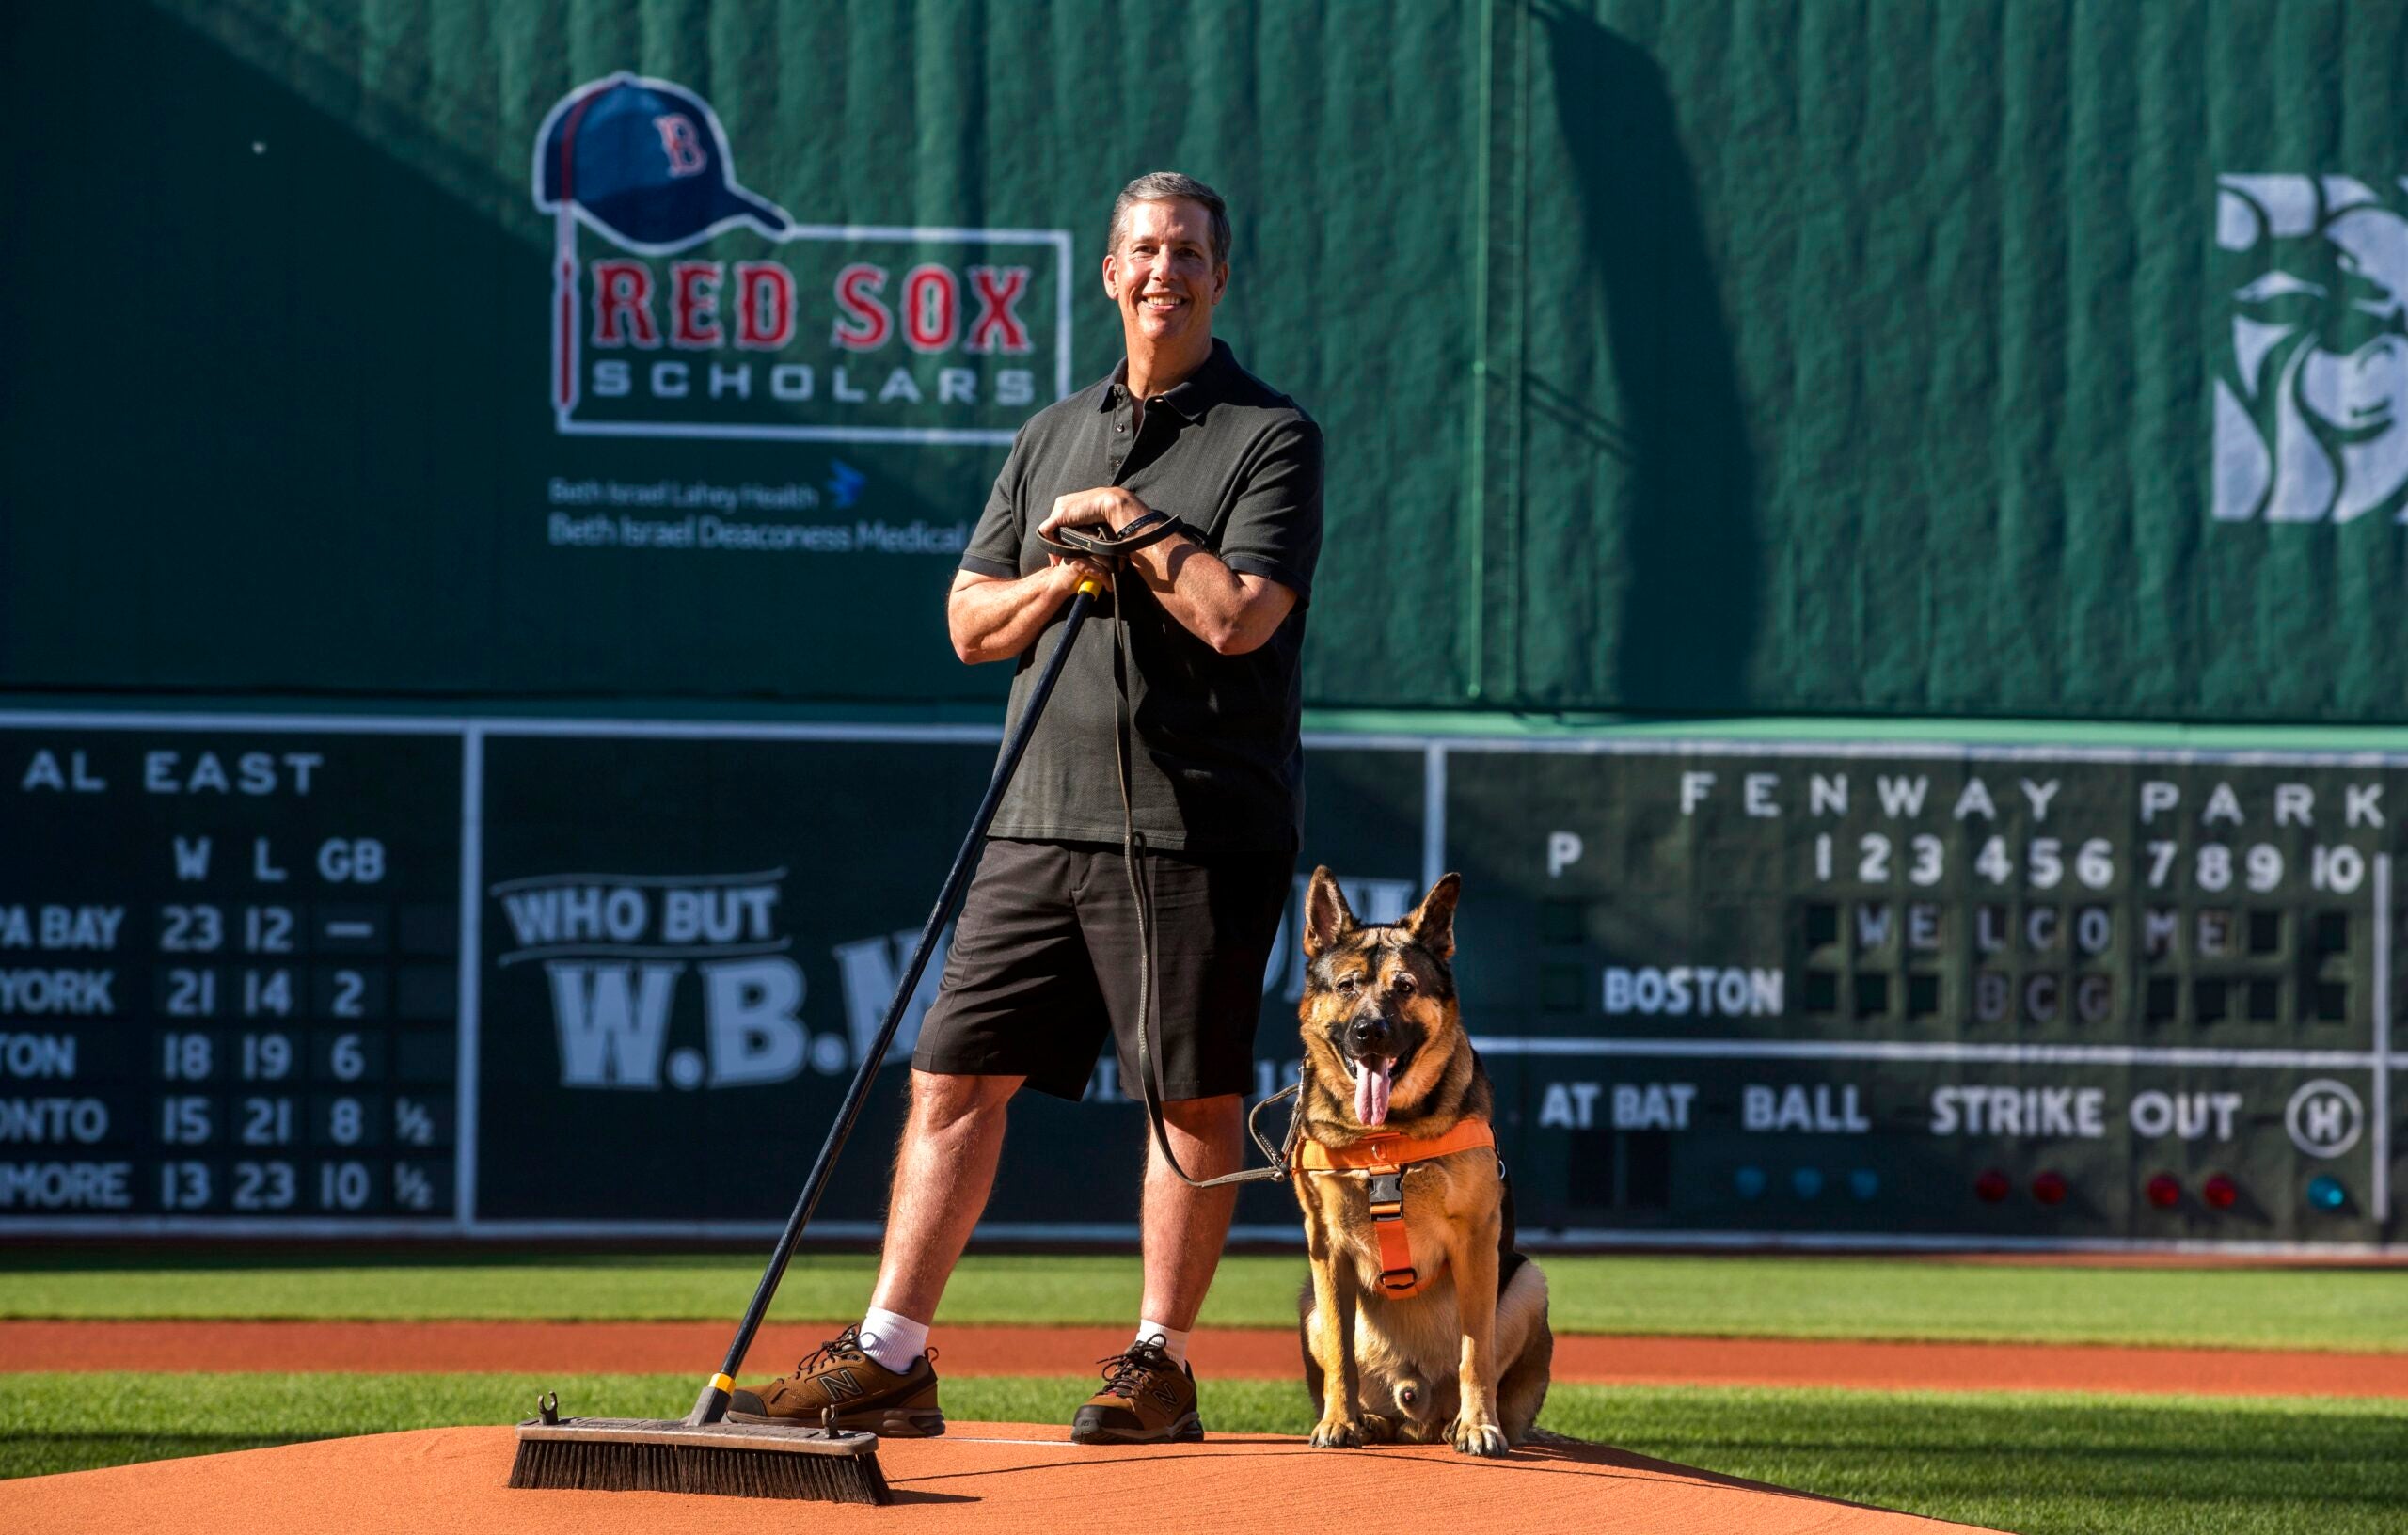 Red Sox groundskeeper Dave Mellor paid tribute to his service dog, Drago